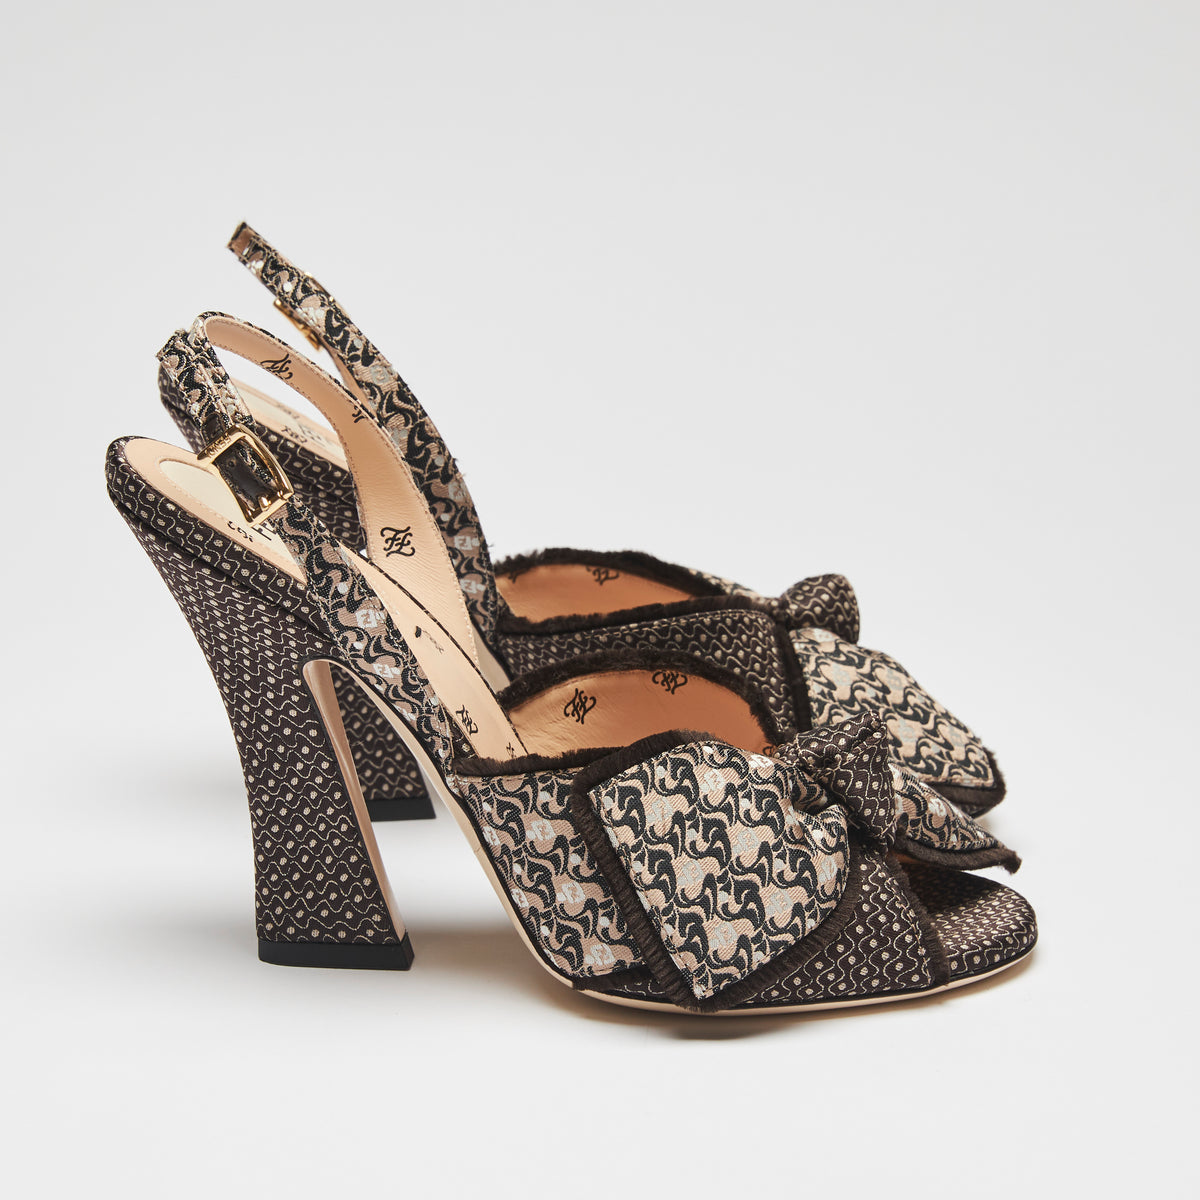 Excellent Pre-Loved Beige and Brown Patterned Fabric Open Toe Sling Back Sandals with Adjustable Ankle Straps(side)